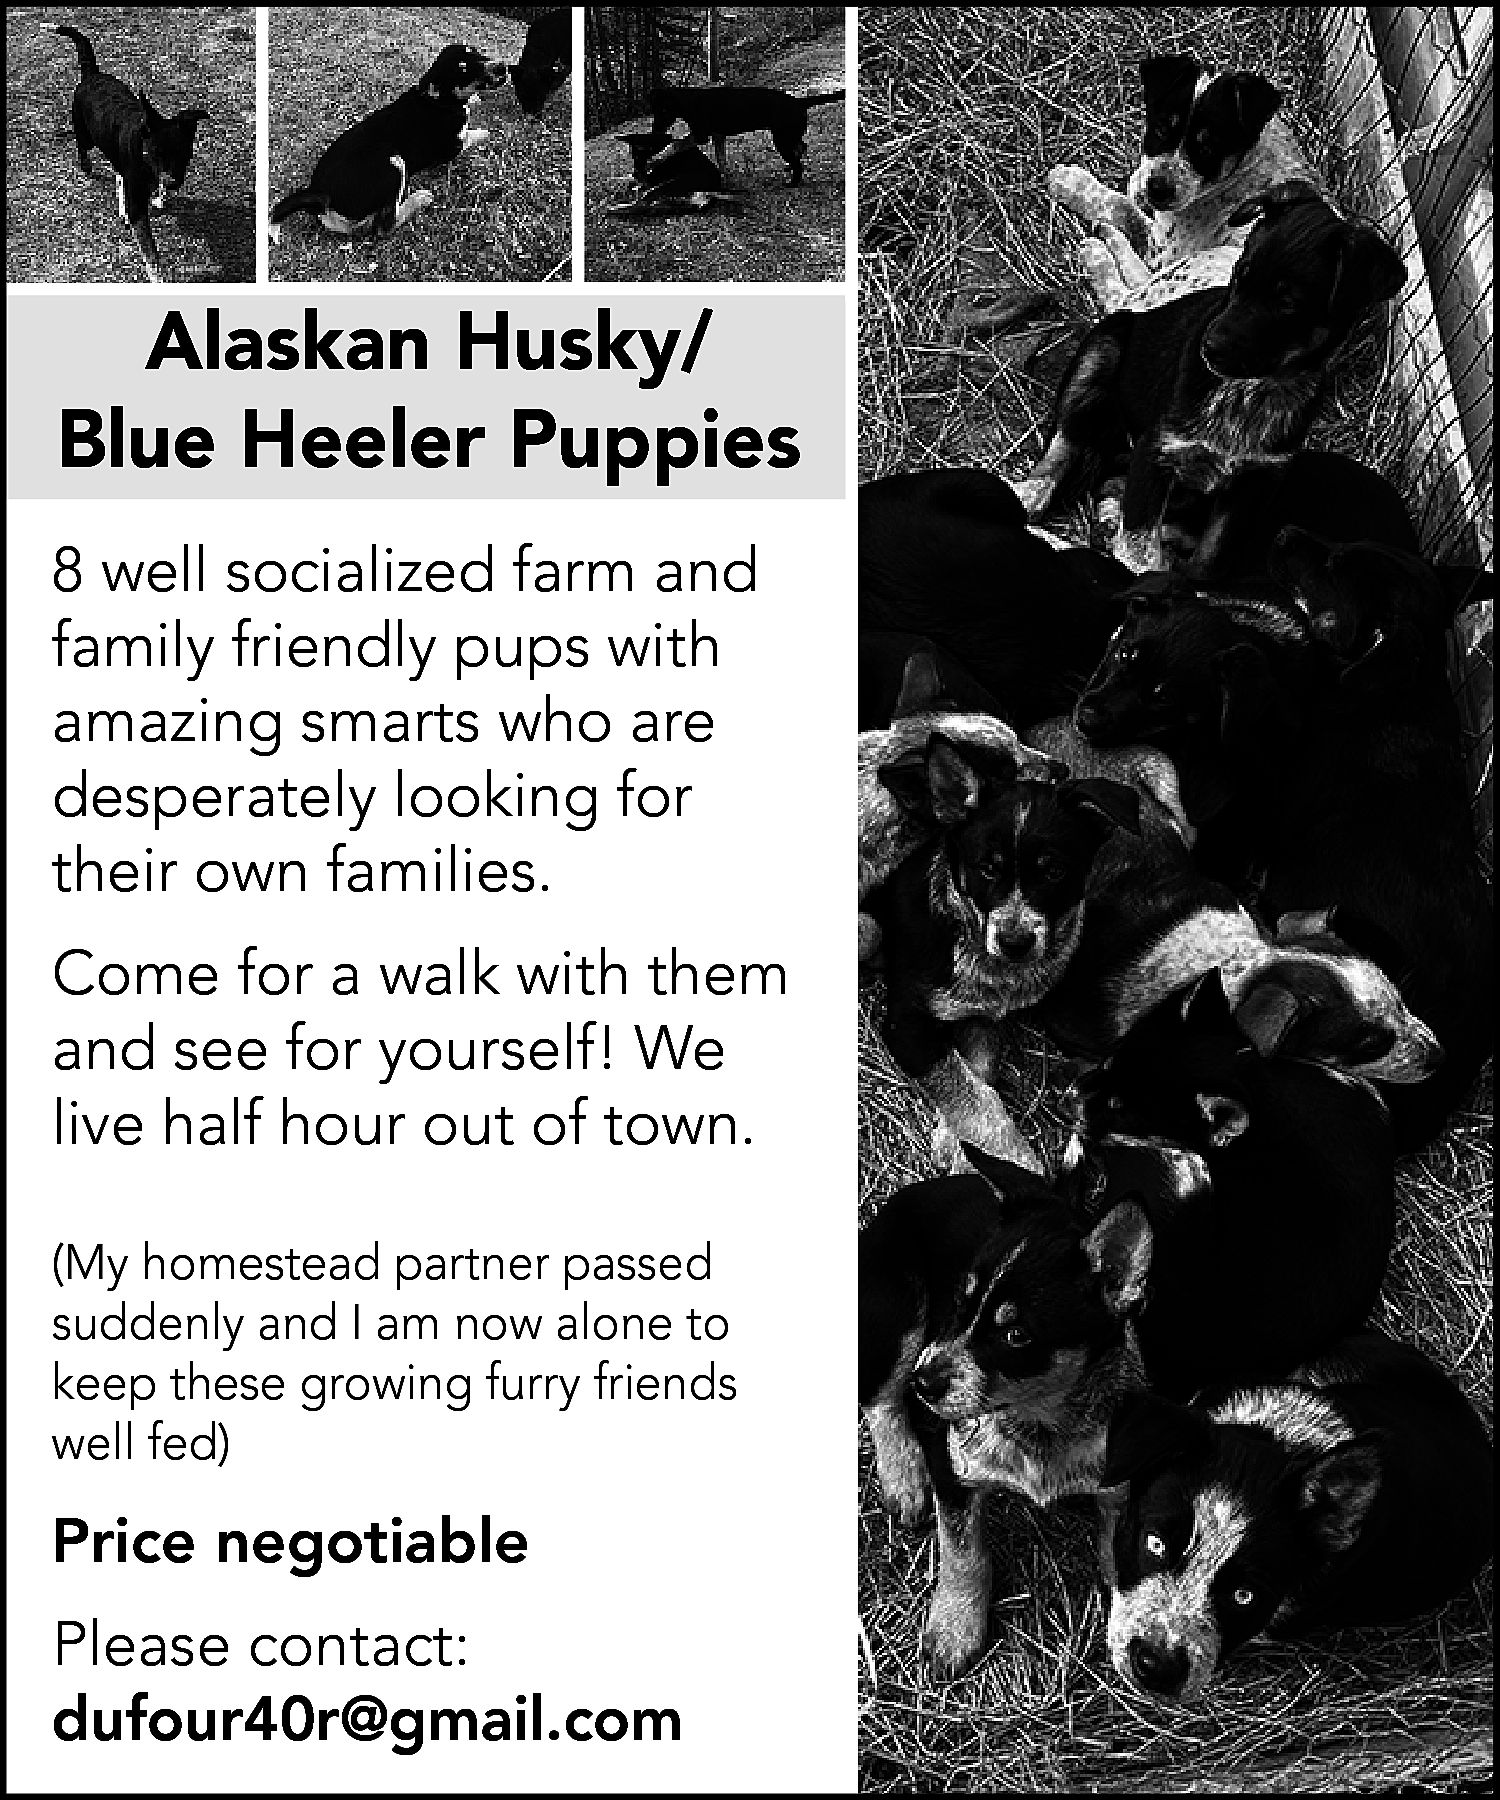 Alaskan Husky/ <br>Blue Heeler Puppies  Alaskan Husky/  Blue Heeler Puppies  8 well socialized farm and  family friendly pups with  amazing smarts who are  desperately looking for  their own families.  Come for a walk with them  and see for yourself! We  live half hour out of town.  (My homestead partner passed  suddenly and I am now alone to  keep these growing furry friends  well fed)    Price negotiable  Please contact:  dufour40r@gmail.com    